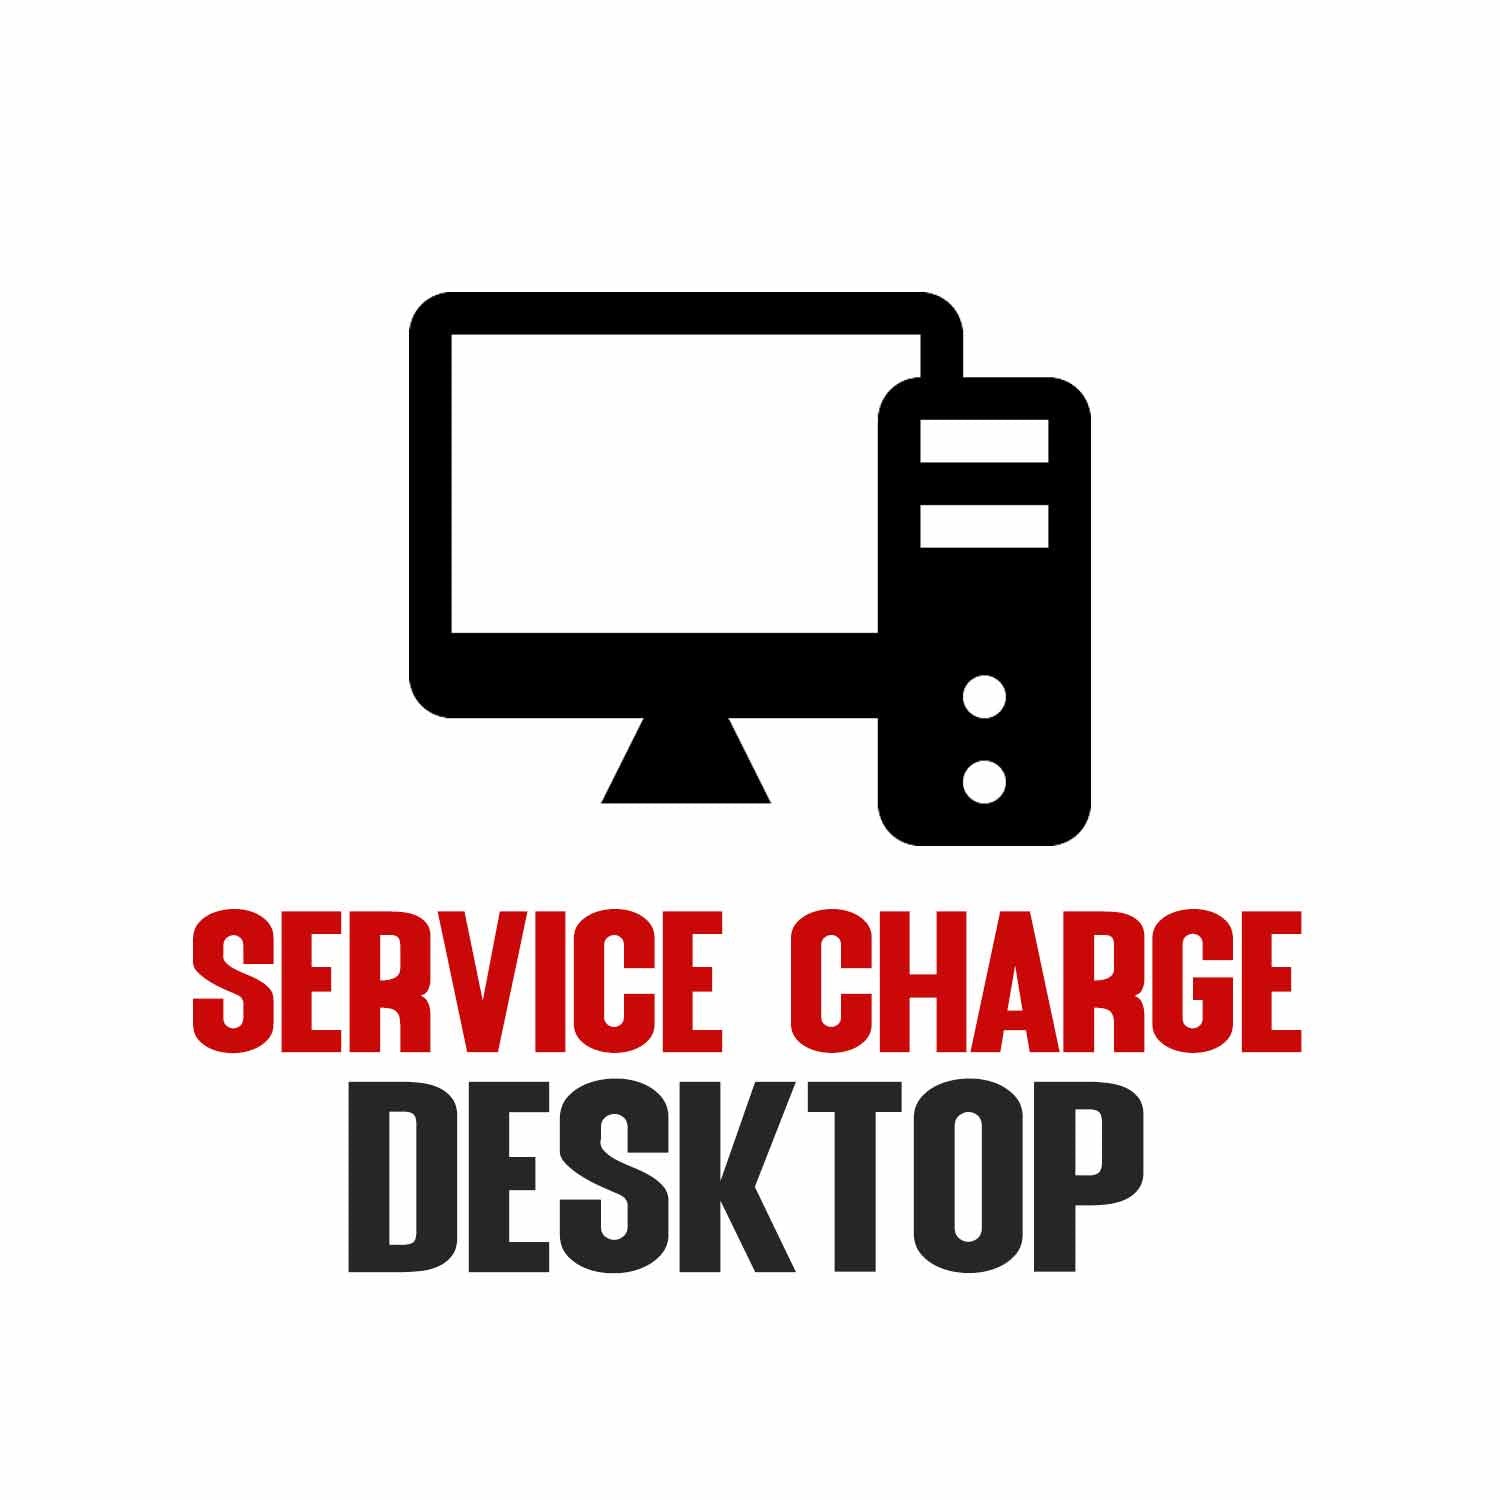 Service Charge ( format with back up) - Desktop